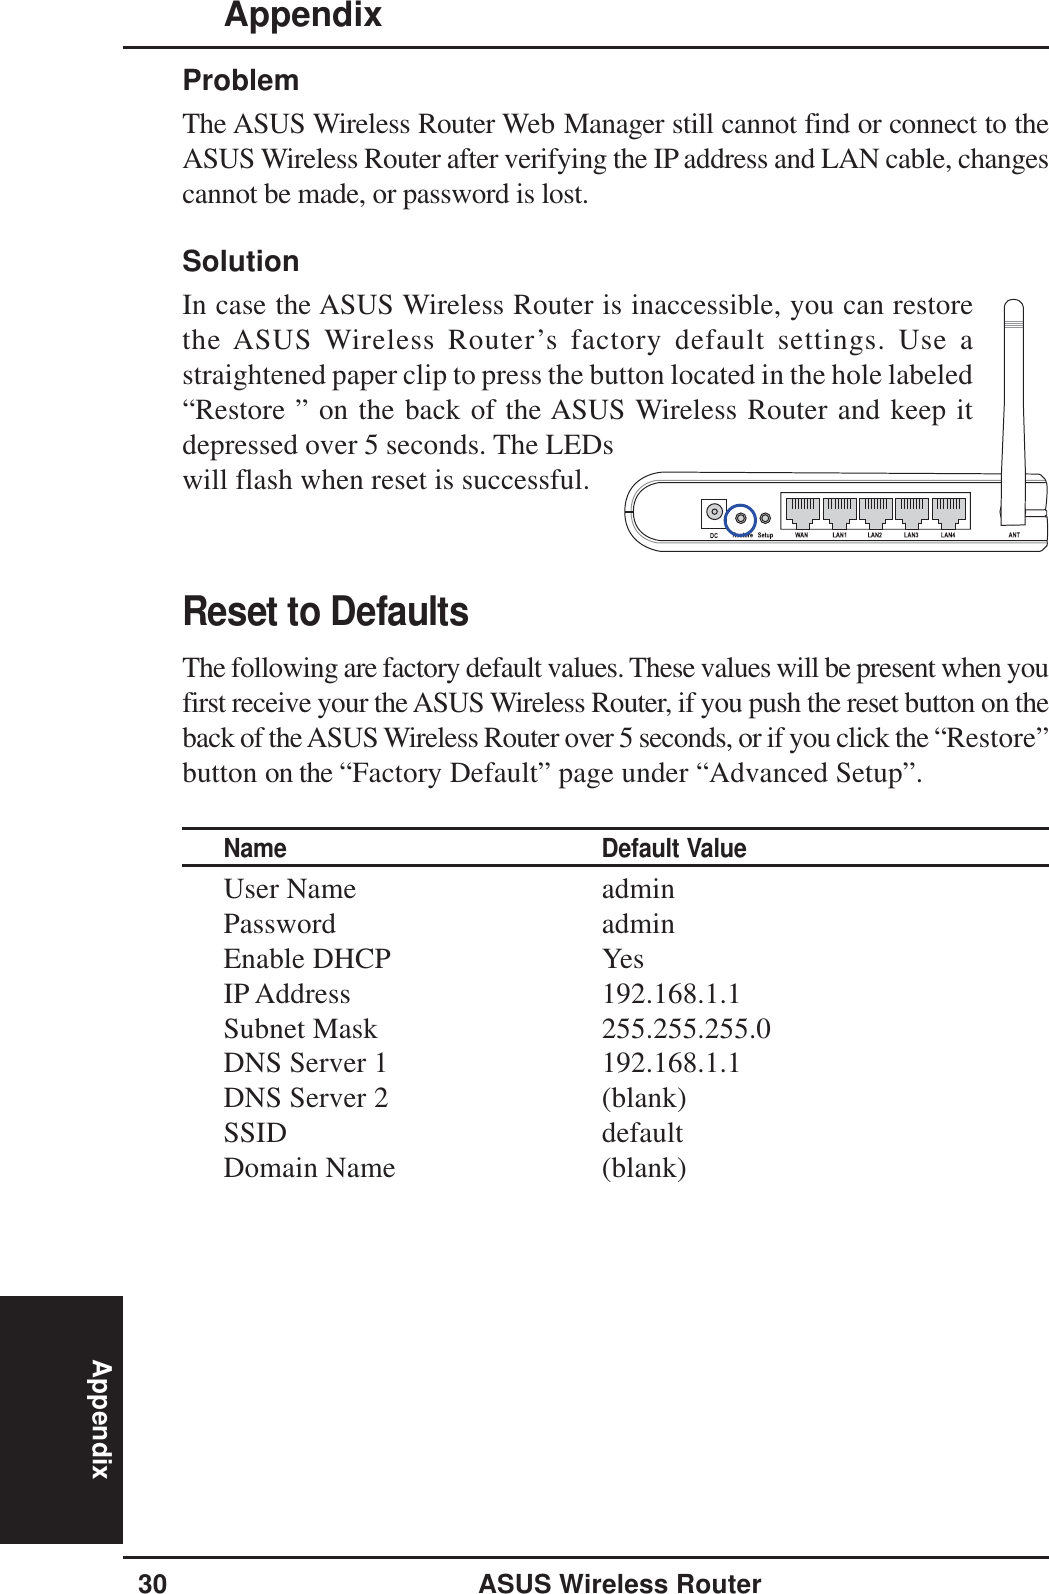 Appendix30 ASUS Wireless RouterAppendixProblemThe ASUS Wireless Router Web Manager still cannot find or connect to theASUS Wireless Router after verifying the IP address and LAN cable, changescannot be made, or password is lost.SolutionIn case the ASUS Wireless Router is inaccessible, you can restorethe ASUS Wireless Router’s factory default settings. Use astraightened paper clip to press the button located in the hole labeled“Restore ” on the back of the ASUS Wireless Router and keep itdepressed over 5 seconds. The LEDswill flash when reset is successful.Reset to DefaultsThe following are factory default values. These values will be present when youfirst receive your the ASUS Wireless Router, if you push the reset button on theback of the ASUS Wireless Router over 5 seconds, or if you click the “Restore”button on the “Factory Default” page under “Advanced Setup”.Name Default ValueUser Name adminPassword adminEnable DHCP YesIP Address 192.168.1.1Subnet Mask 255.255.255.0DNS Server 1 192.168.1.1DNS Server 2 (blank)SSID defaultDomain Name (blank)